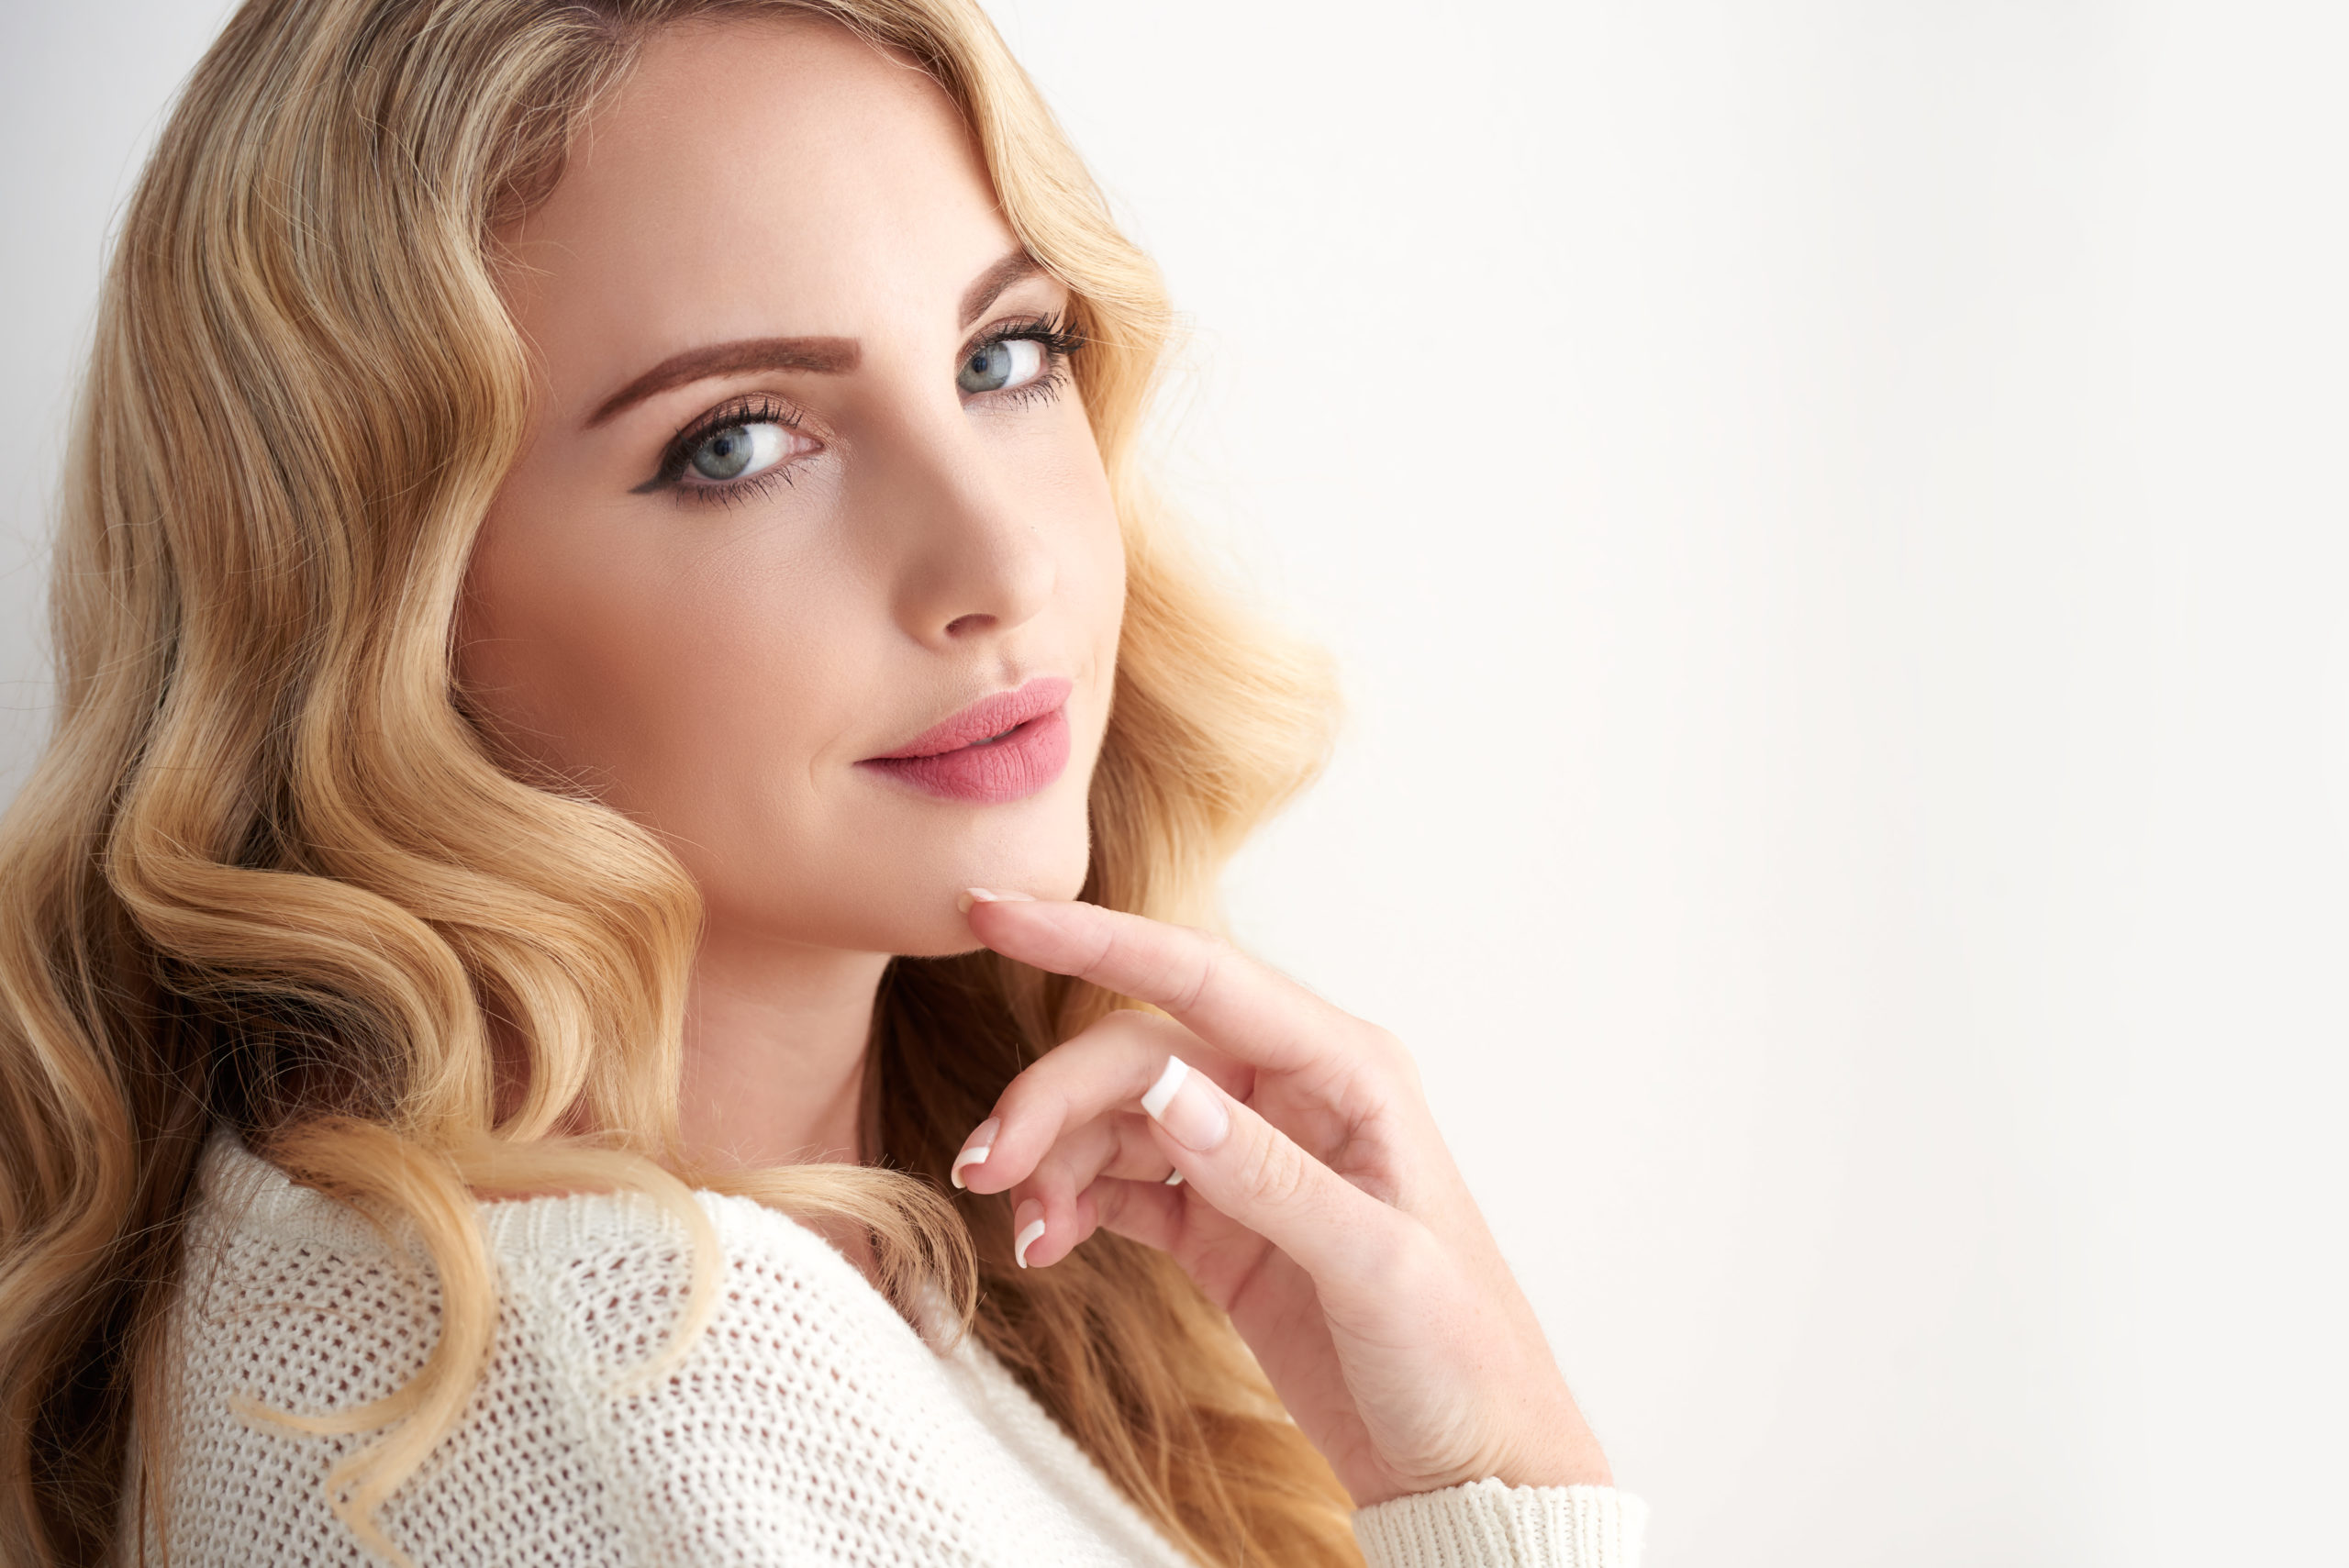 Portrait of gorgeous young woman with wavy blond hair posing elegantly looking at camera